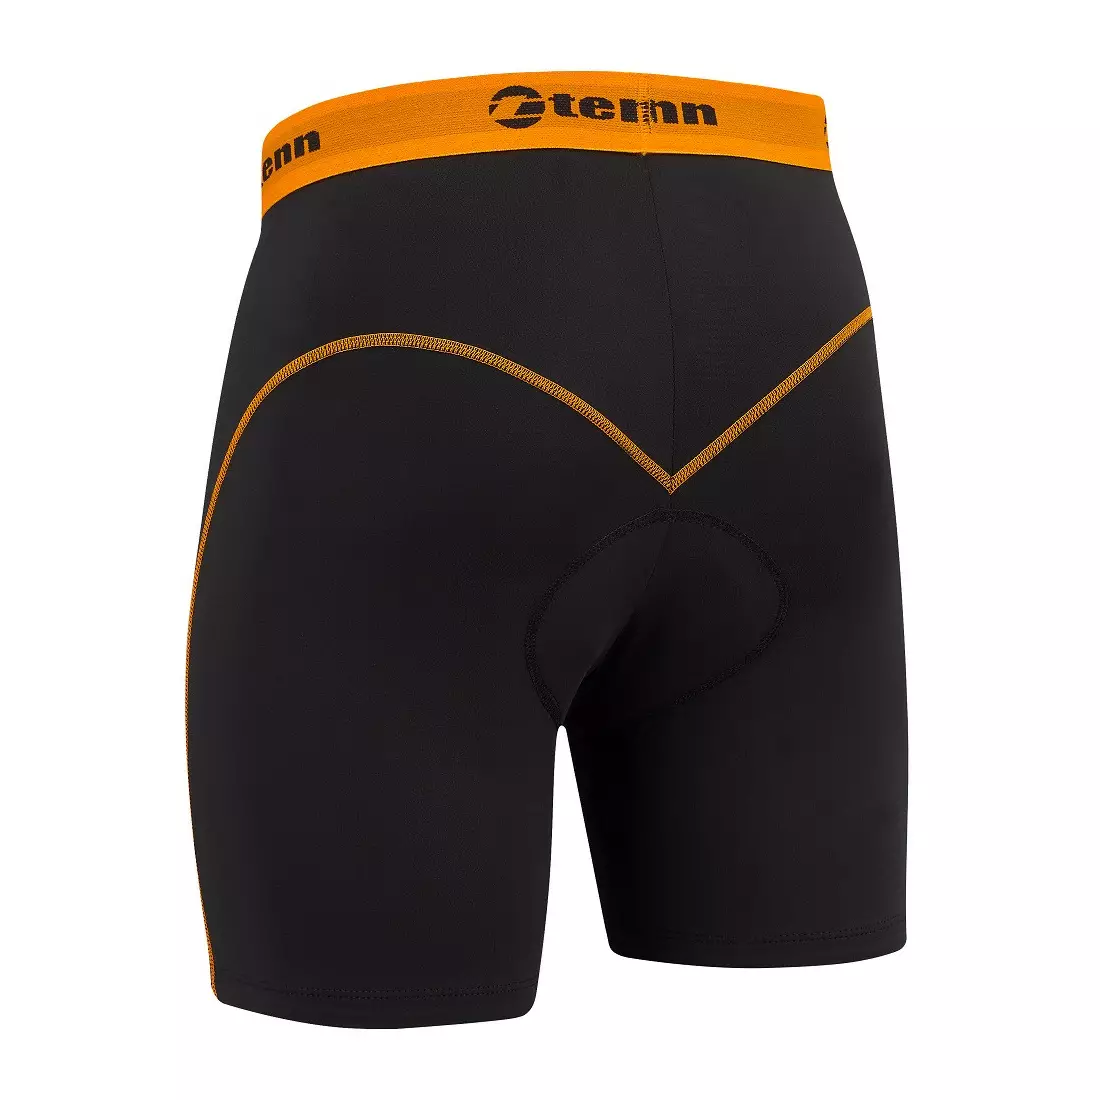 TENN OUTDOORS COOLFLO men's cycling boxer shorts, black and orange